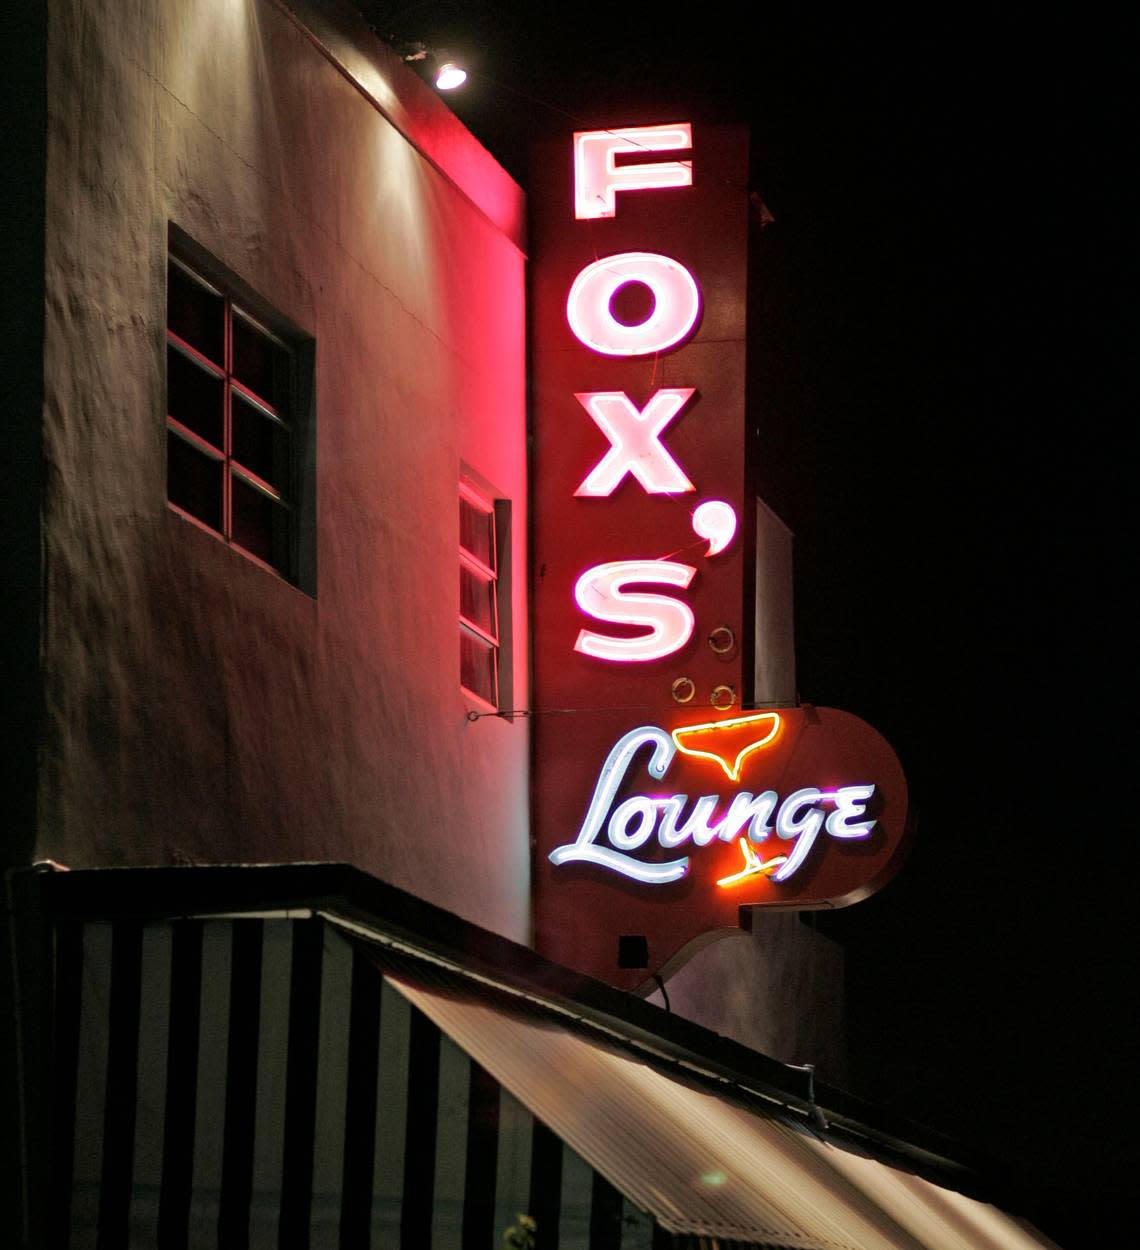 The original Fox’s Lounge sign as it looked in 2007